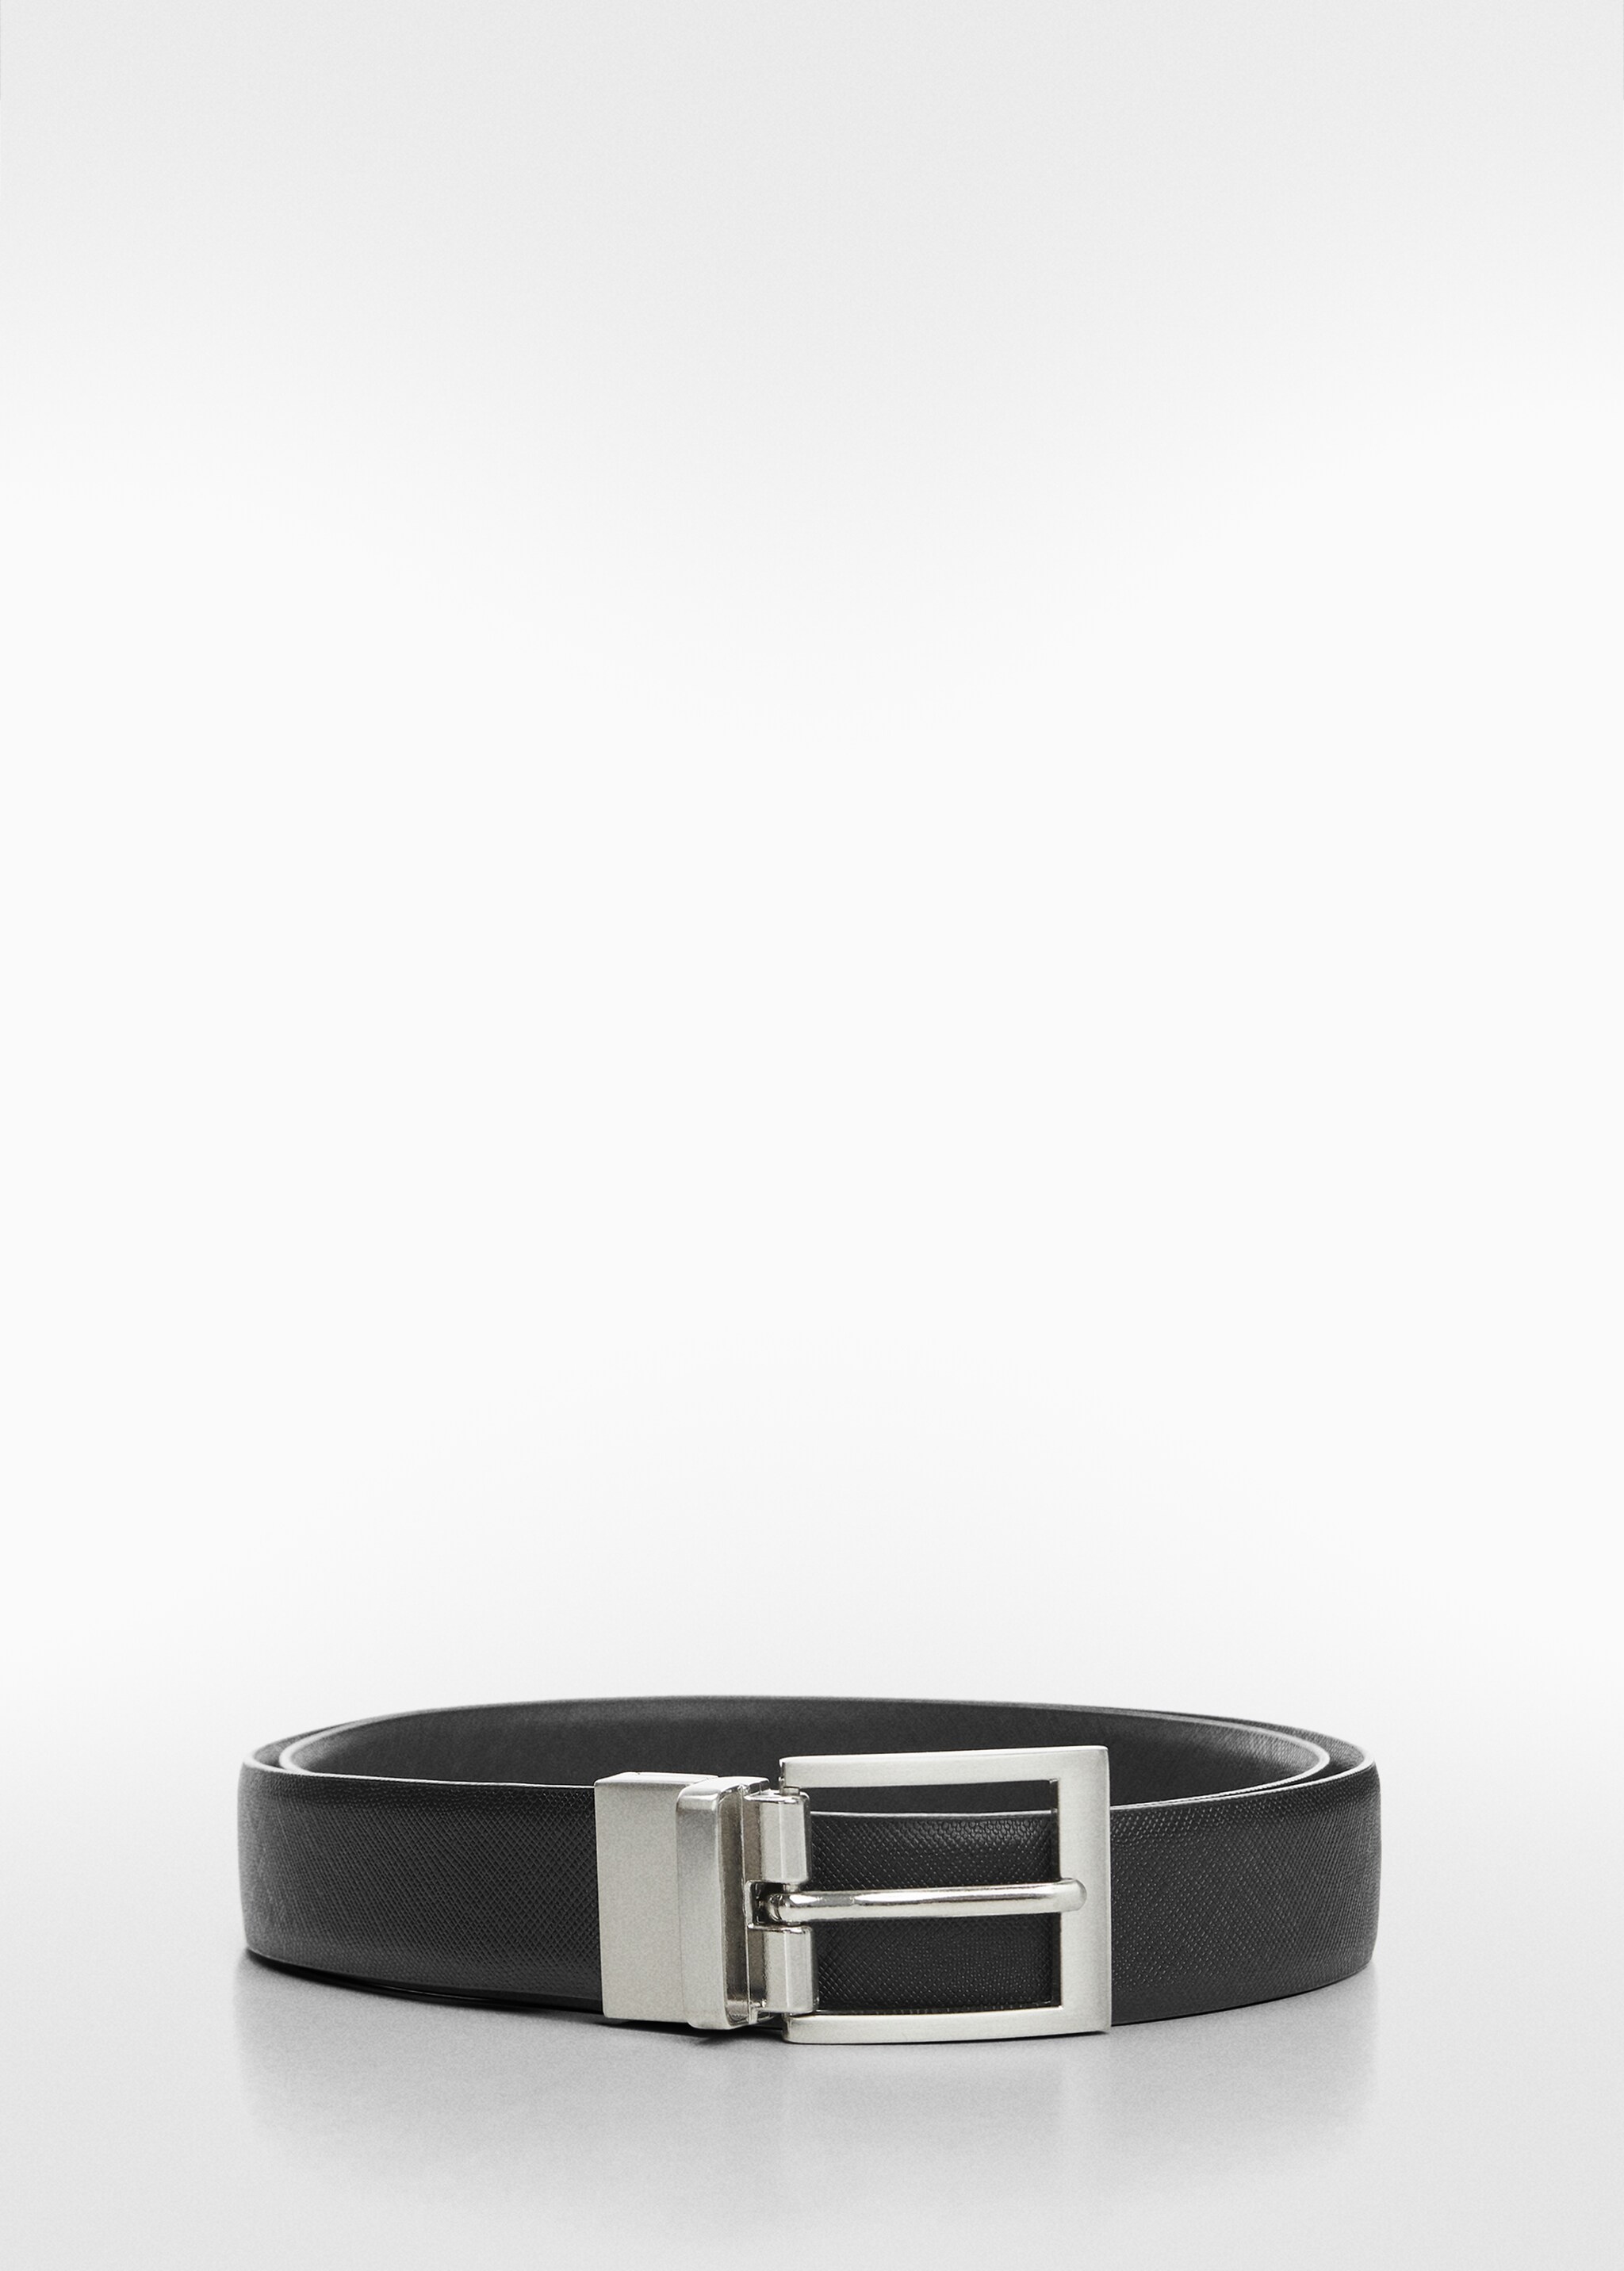 Saffiano leather belt - Article without model